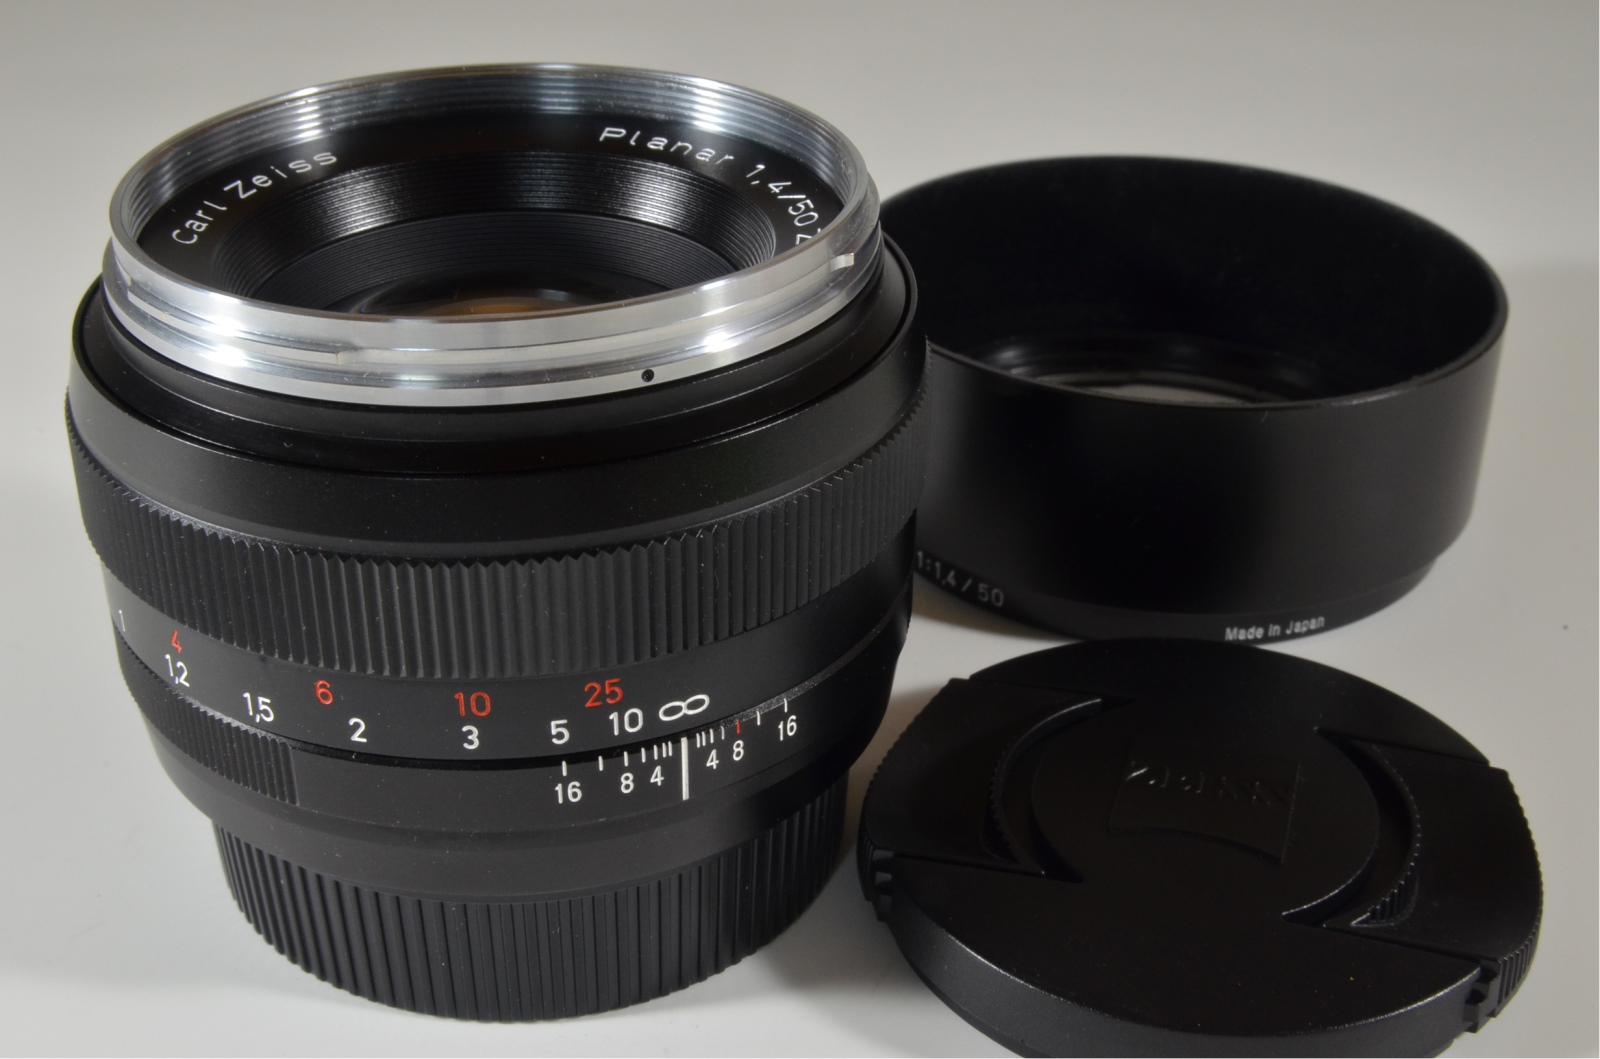 Carl Zeiss Planar T* 50mm f/1.4 ZE for Canon #a0045 – SuperB JAPAN